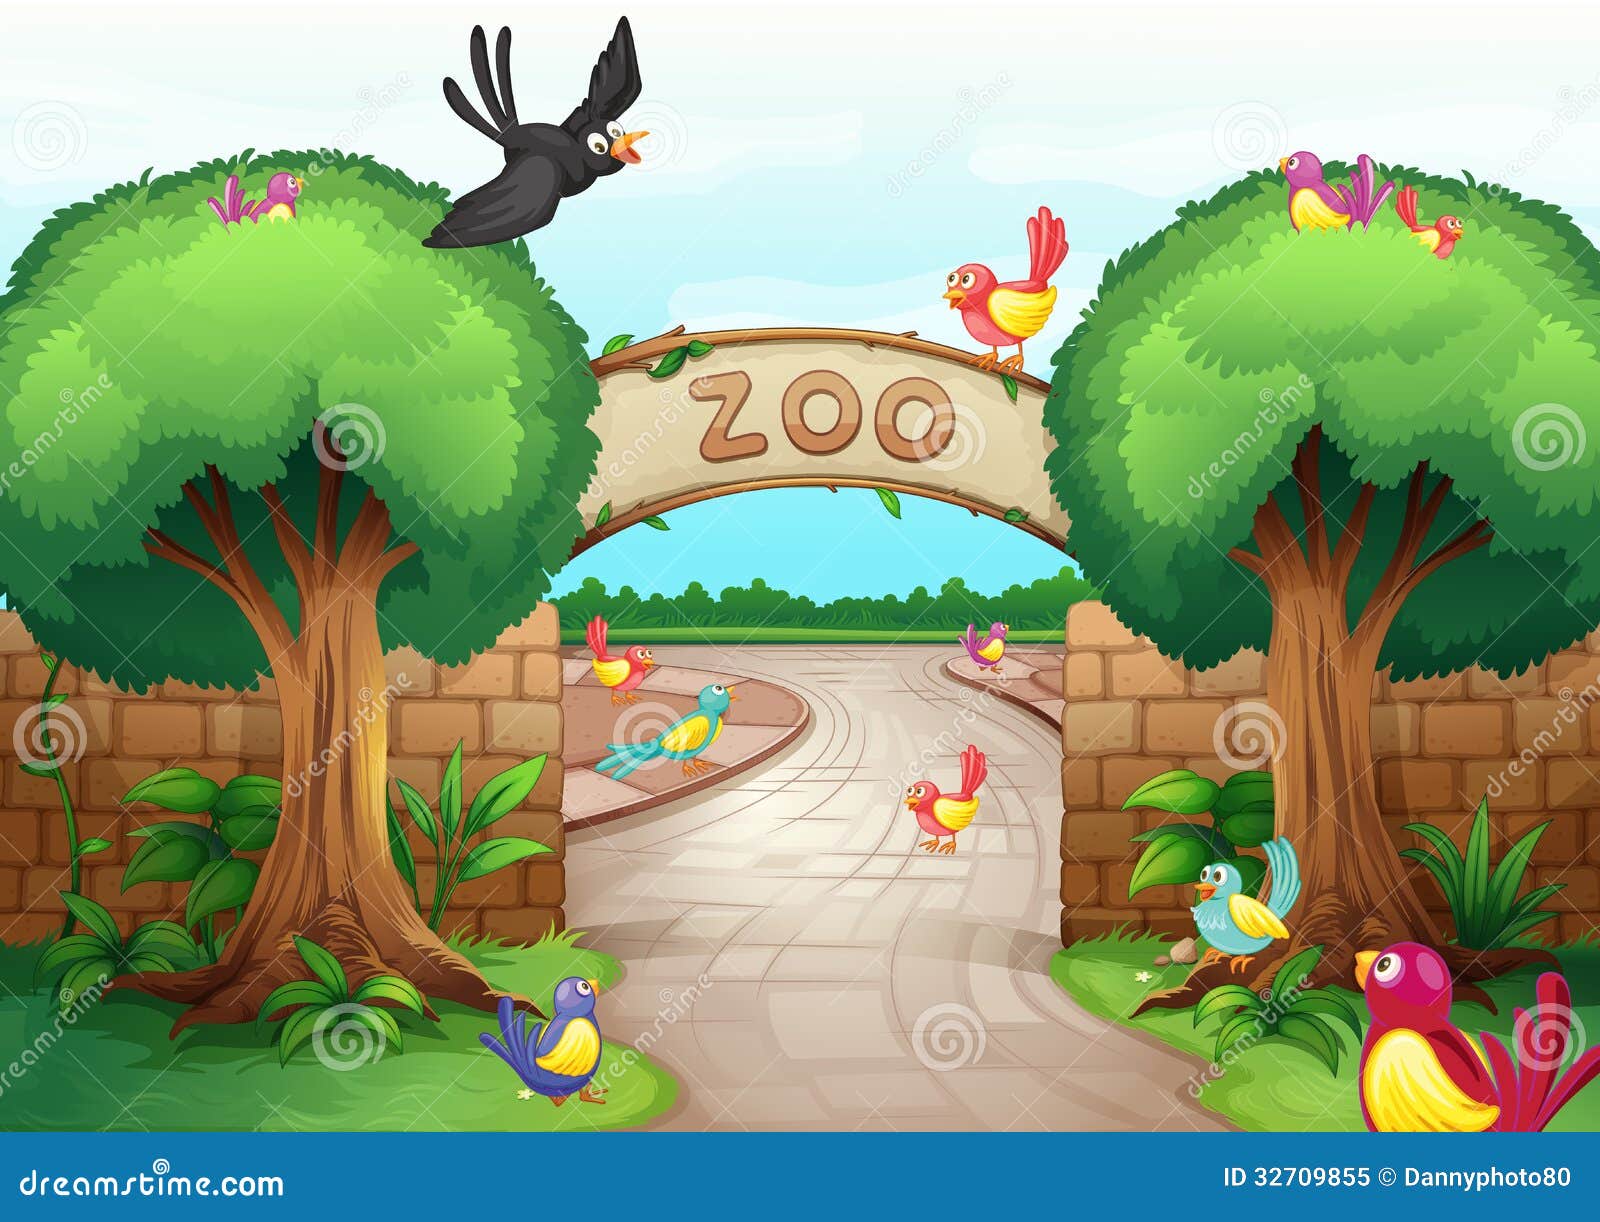 zoo map clipart - photo #49